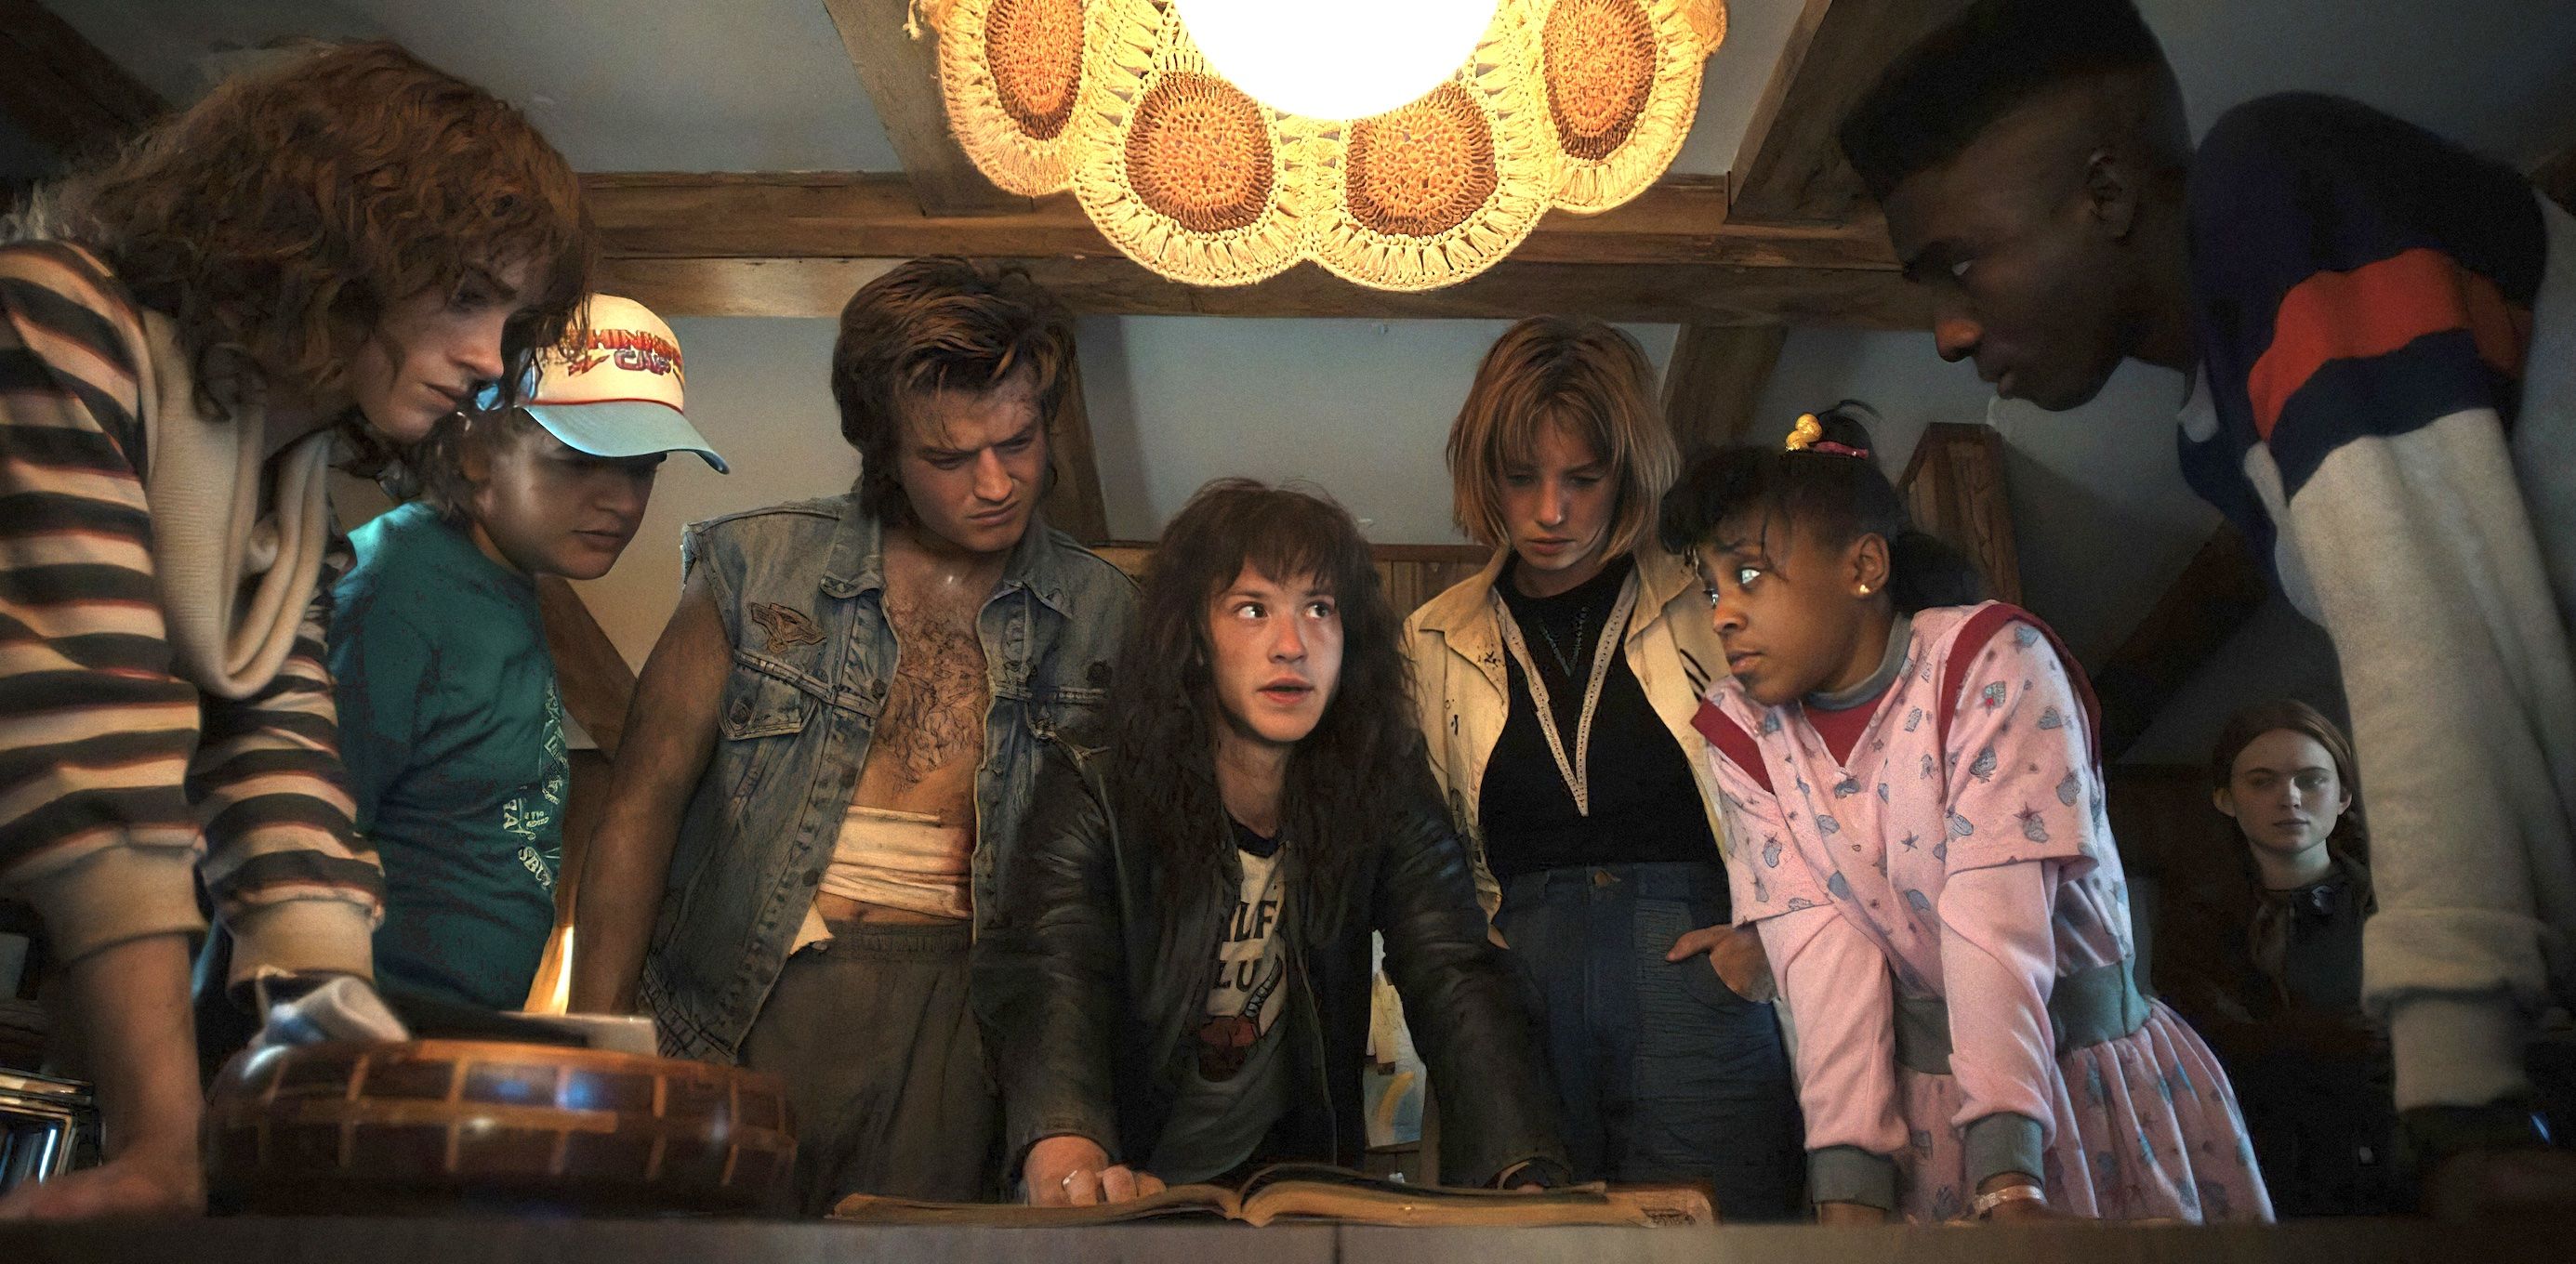 Stranger Things' Season 4 Will Be Split in Two Parts